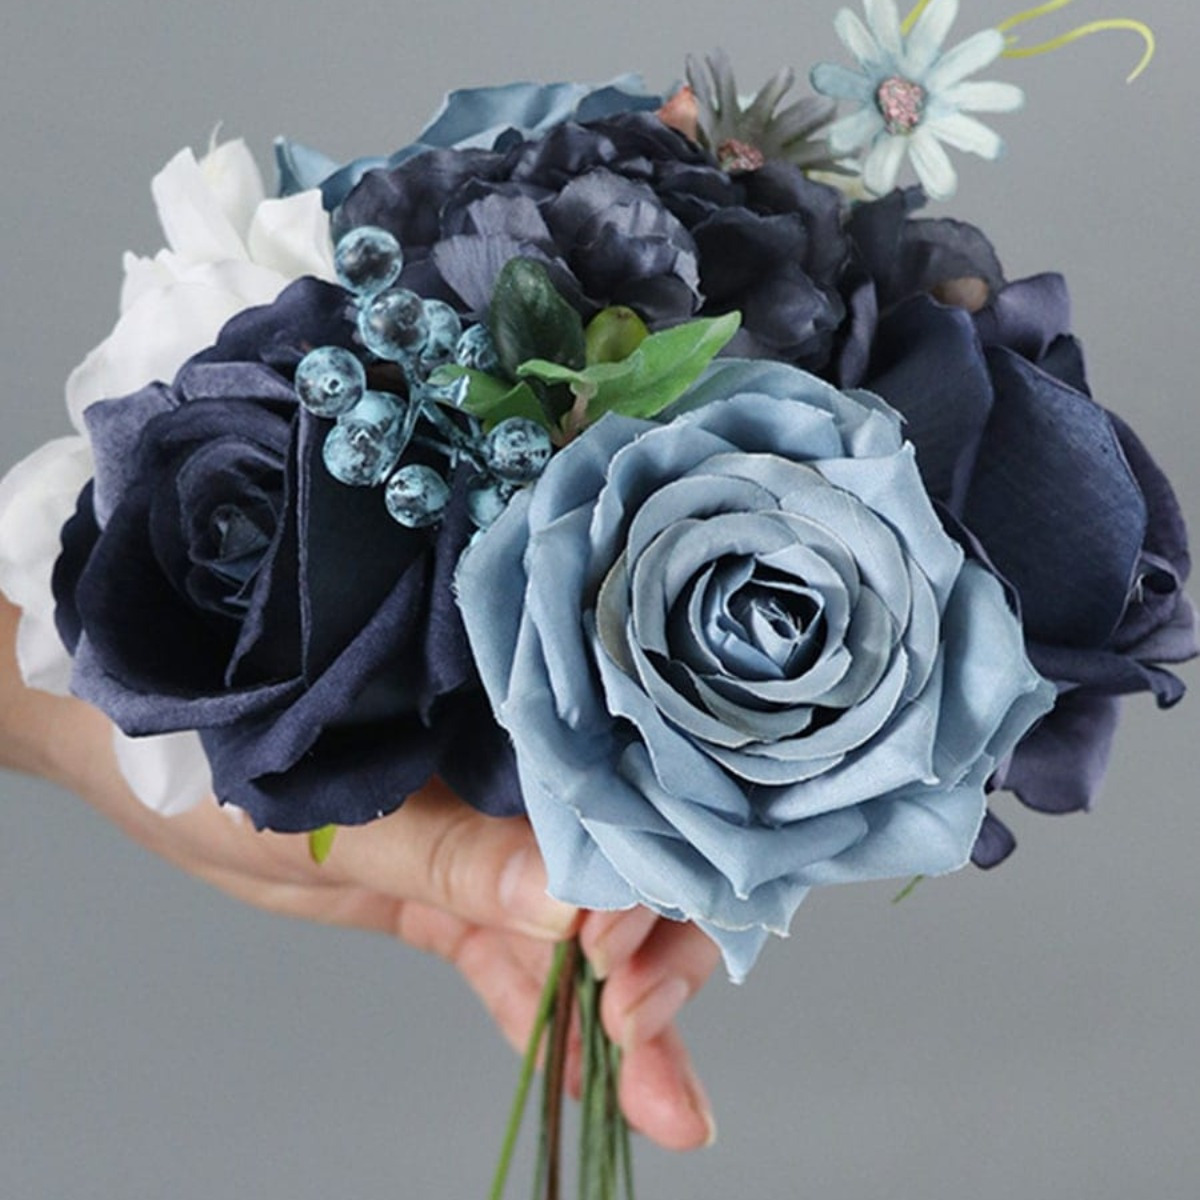 

Artificial Flowers Combo Dusty Blue Flowers Mix Silk Flowers Roses With Stems For Diy Wedding Bridal Bouquets, Baby Shower, Floral Arrangement, Table Centerpieces, Home Decorations